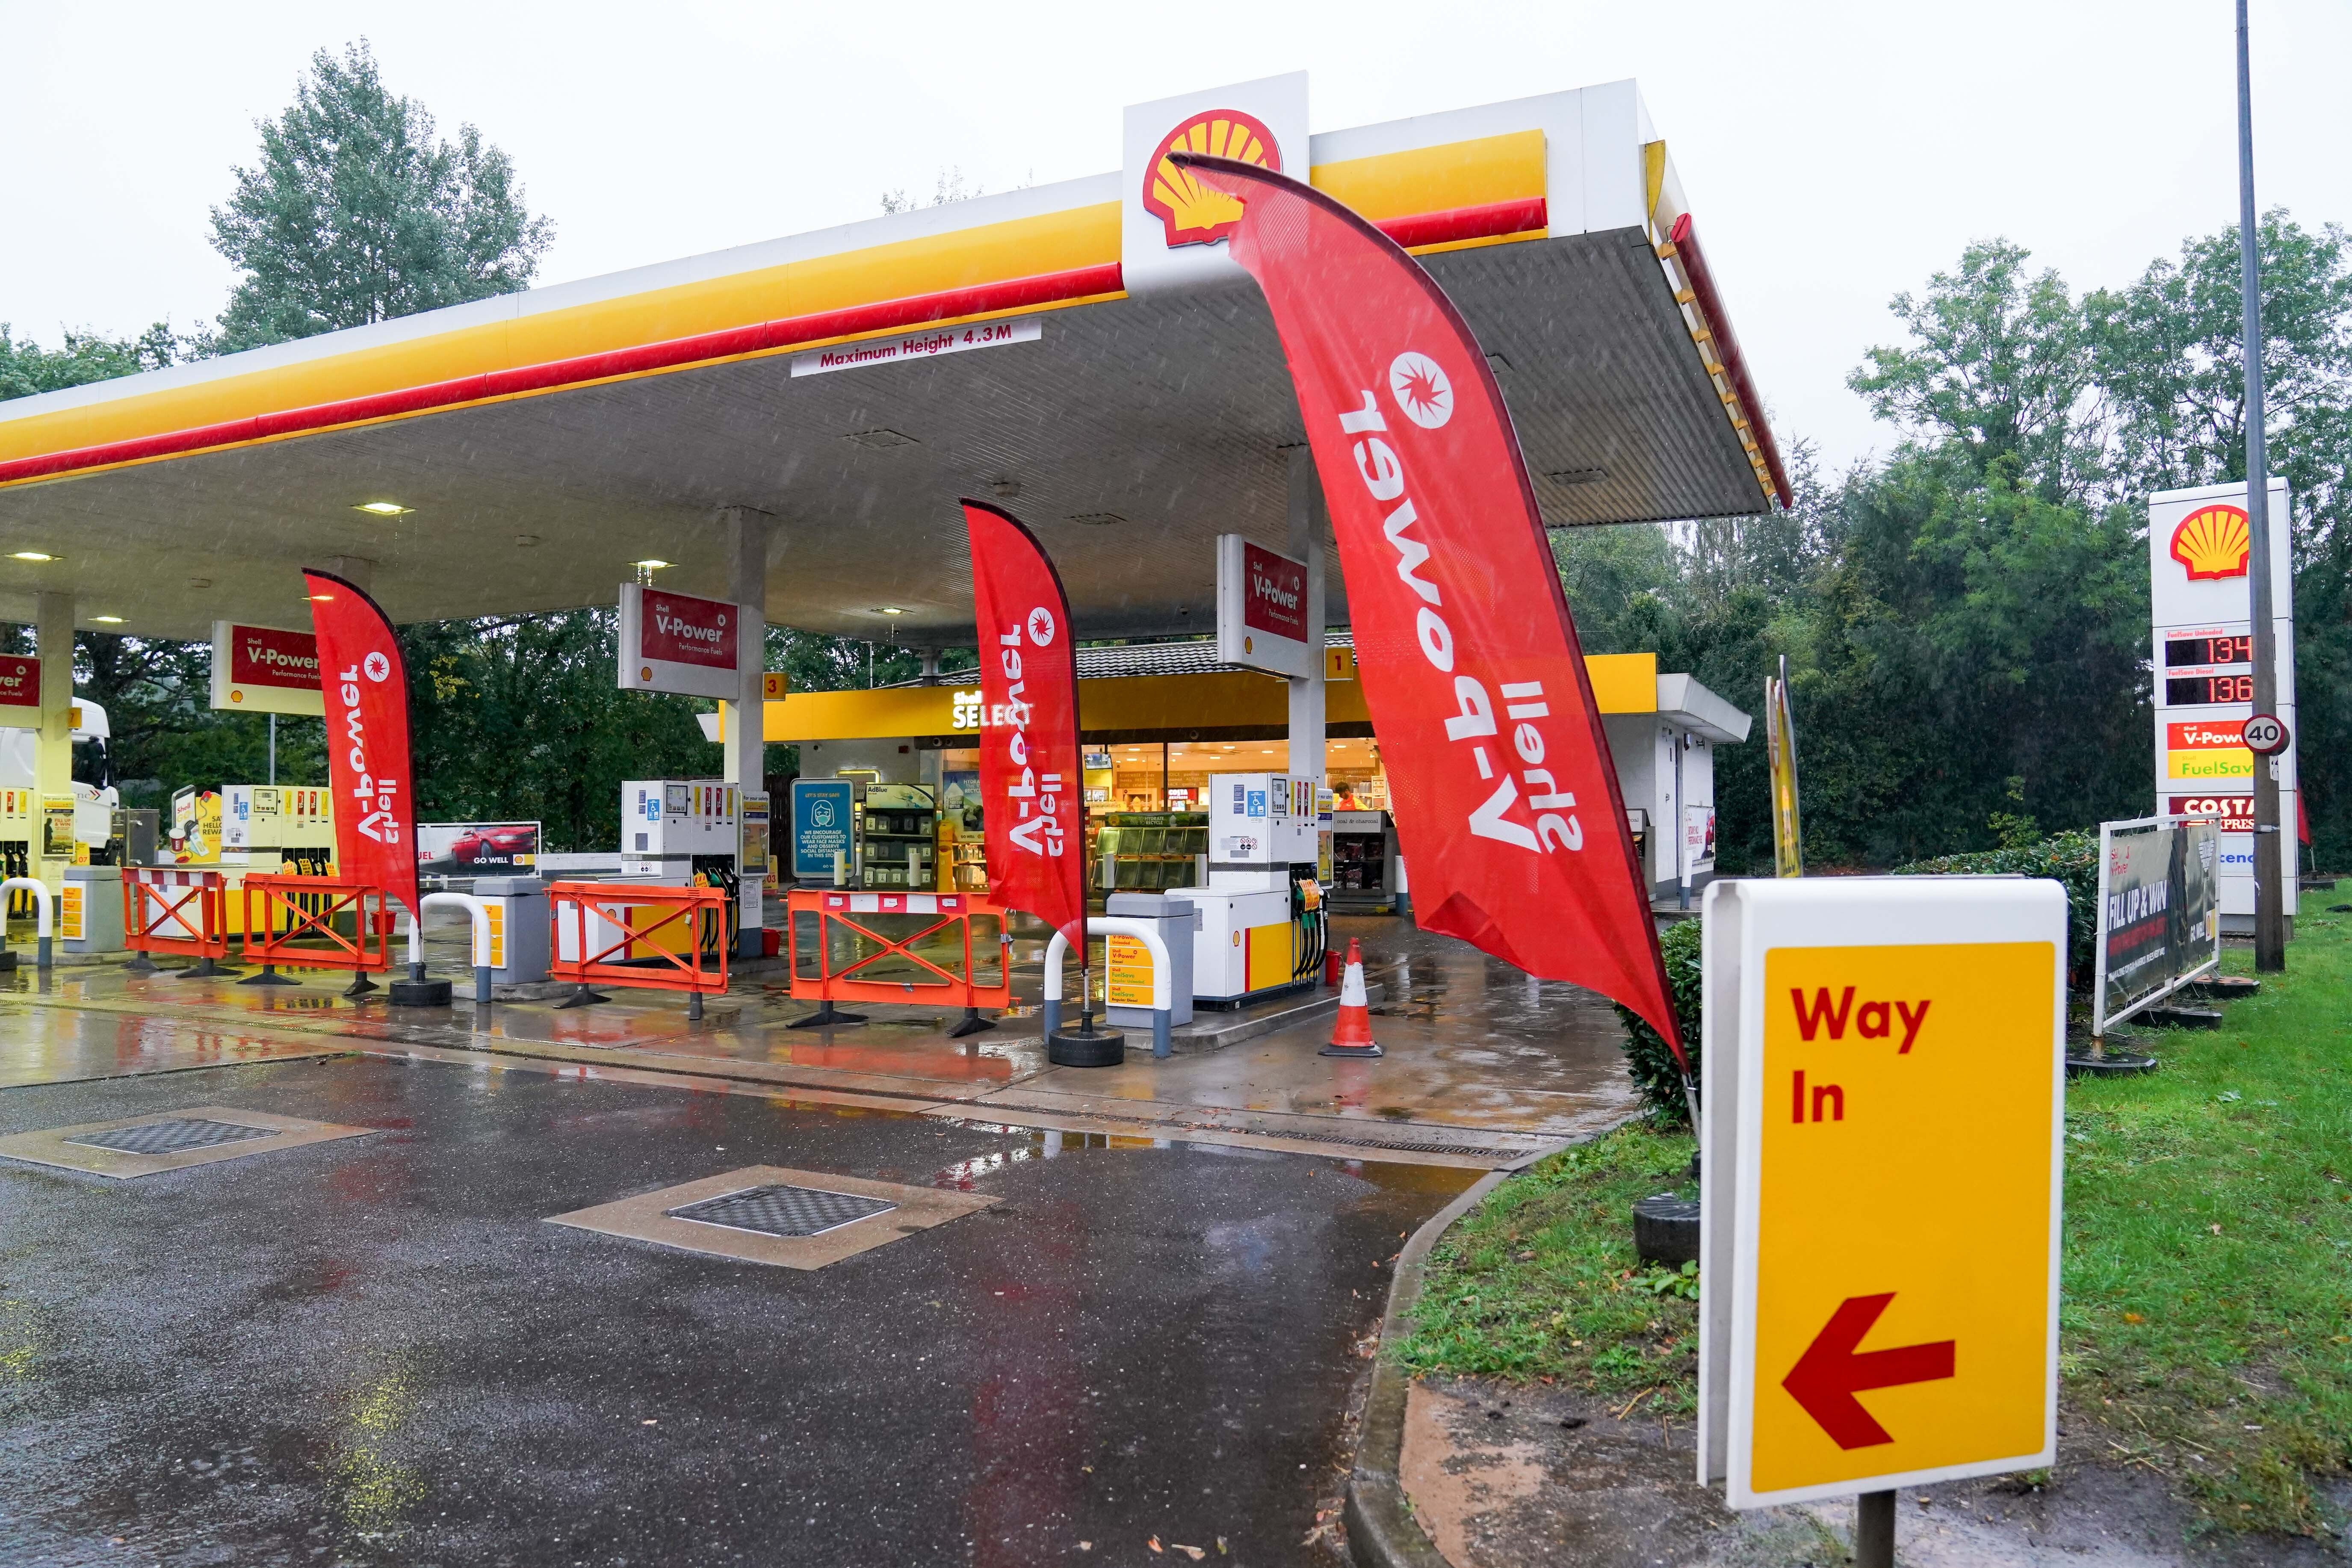 Fuel pumps are out of use at a deserted Shell petrol station forecourt in Warwick (Jacob King/PA)